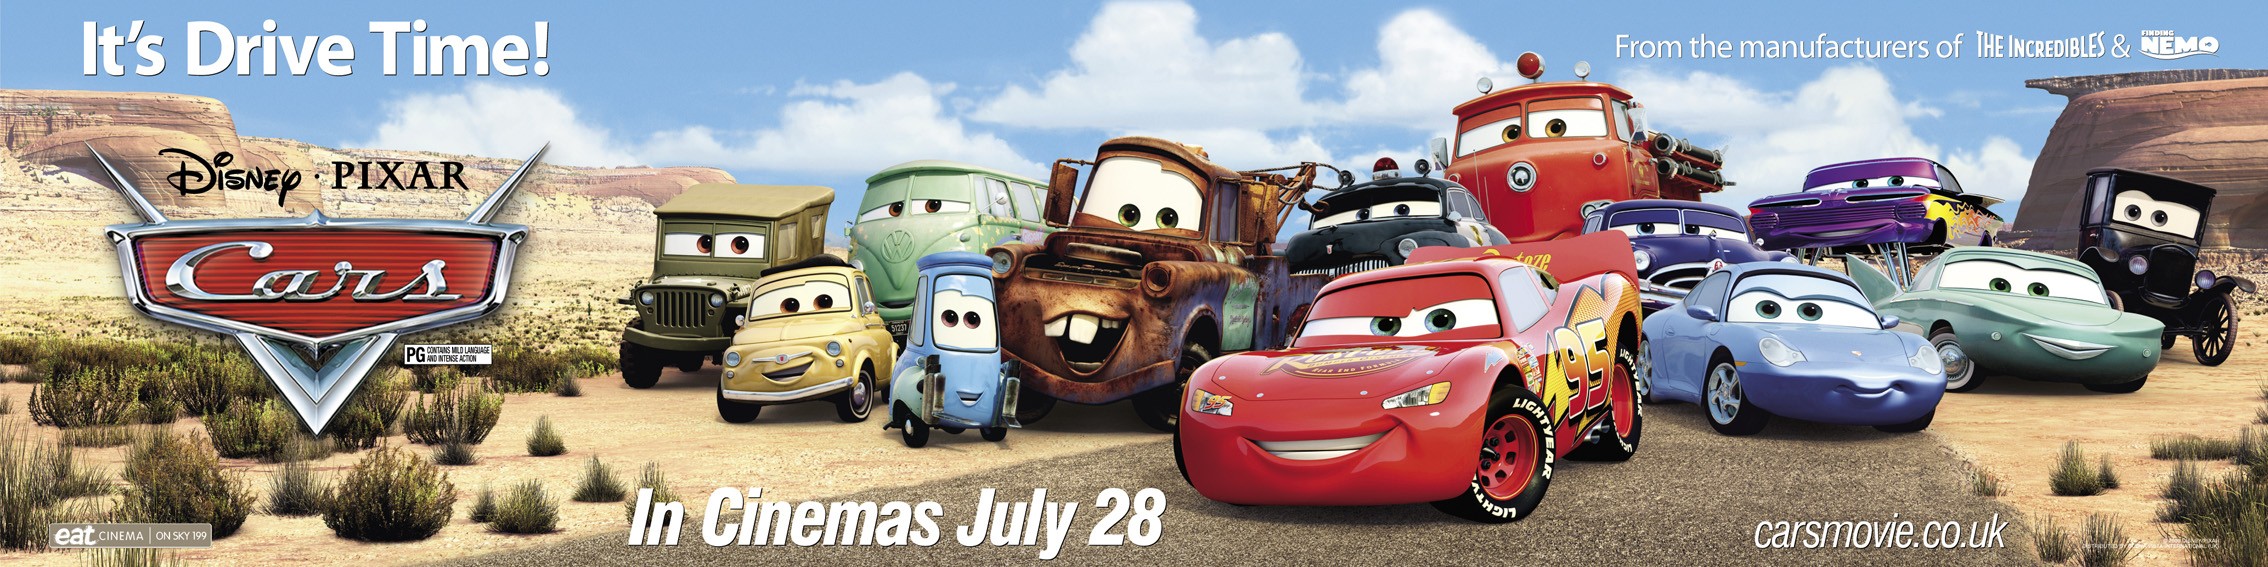 Mega Sized Movie Poster Image for Cars (#13 of 13)